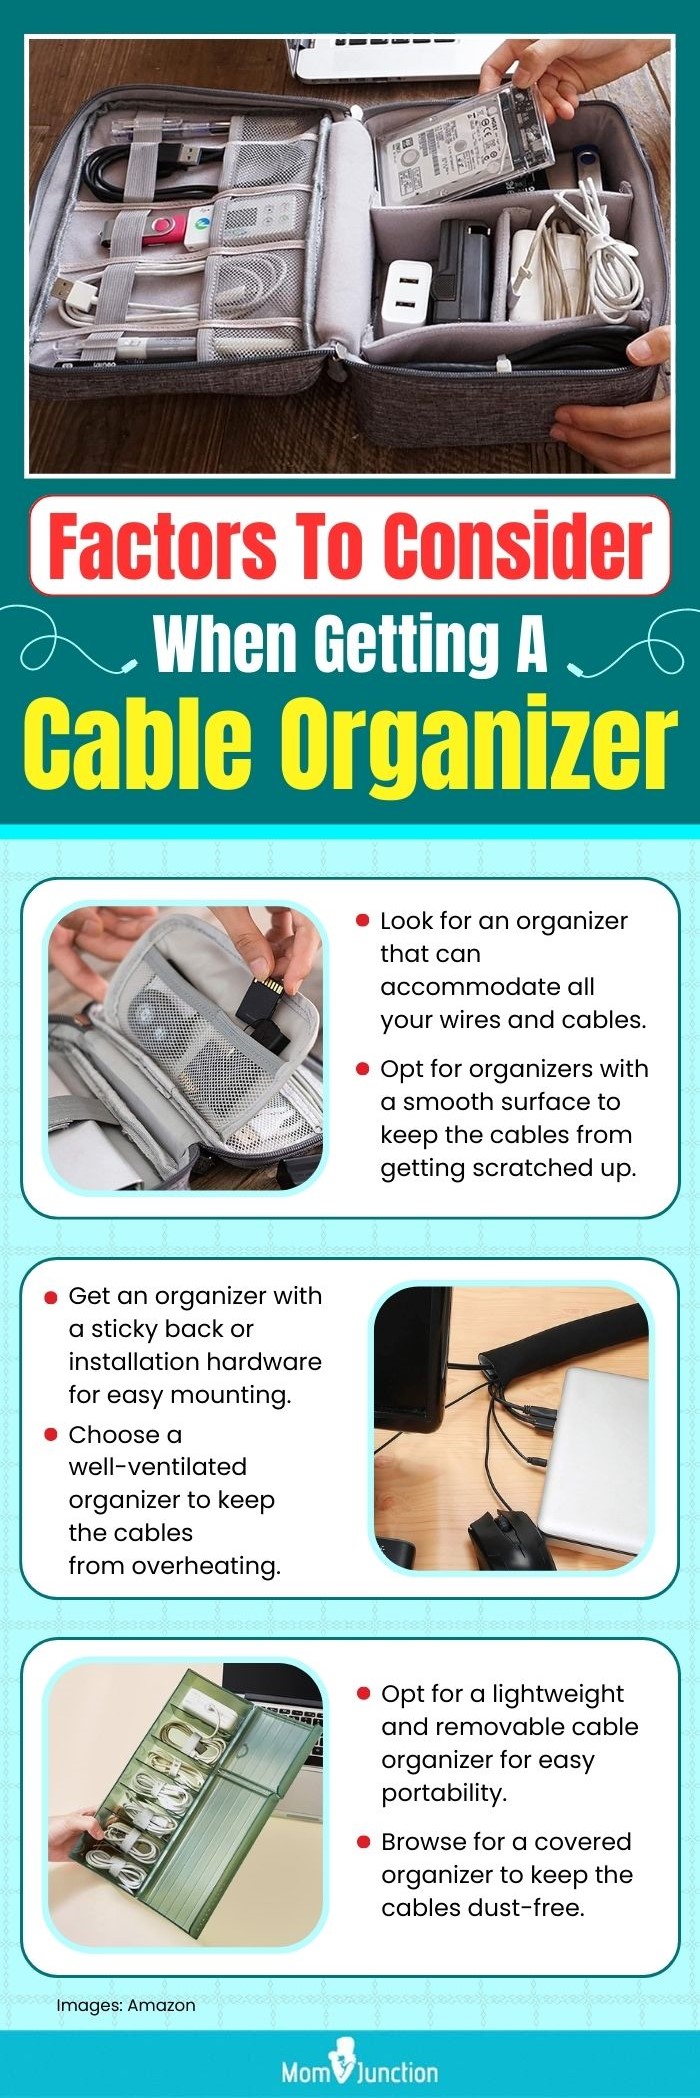 https://cdn2.momjunction.com/wp-content/uploads/2023/08/Factors-To-Consider-When-Getting-A-Cable-Organizer.jpg